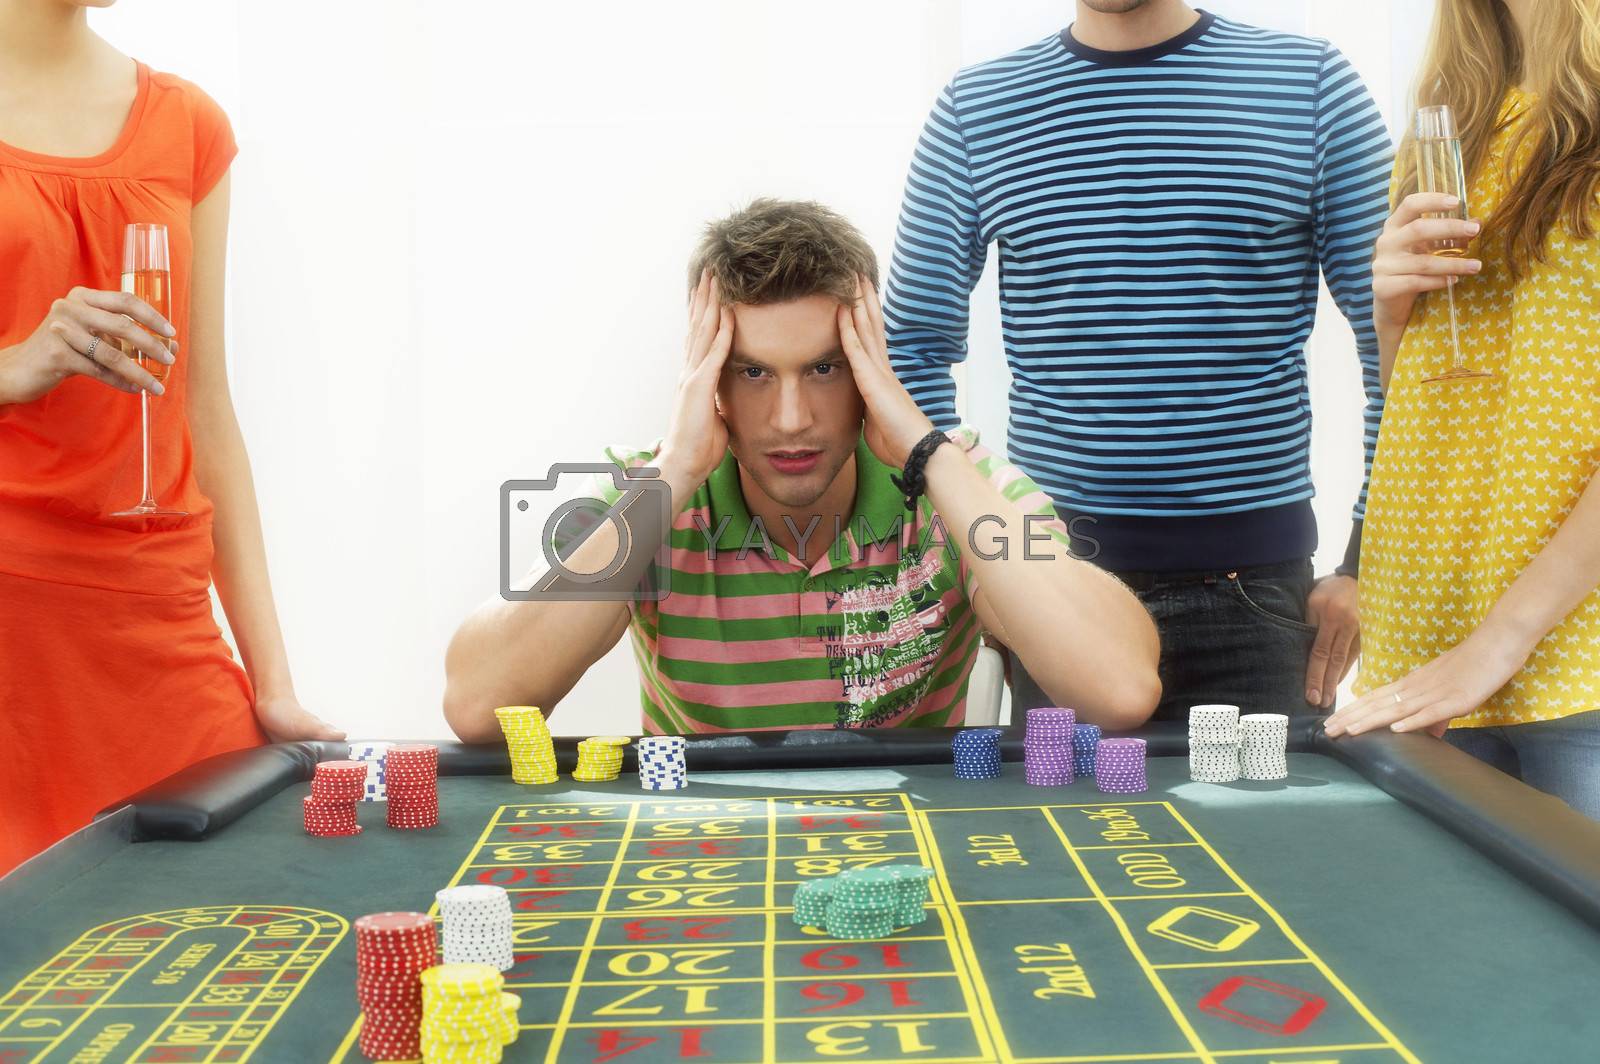 Royalty free image of Young frustrated man at roulette table with midsection of friends by moodboard